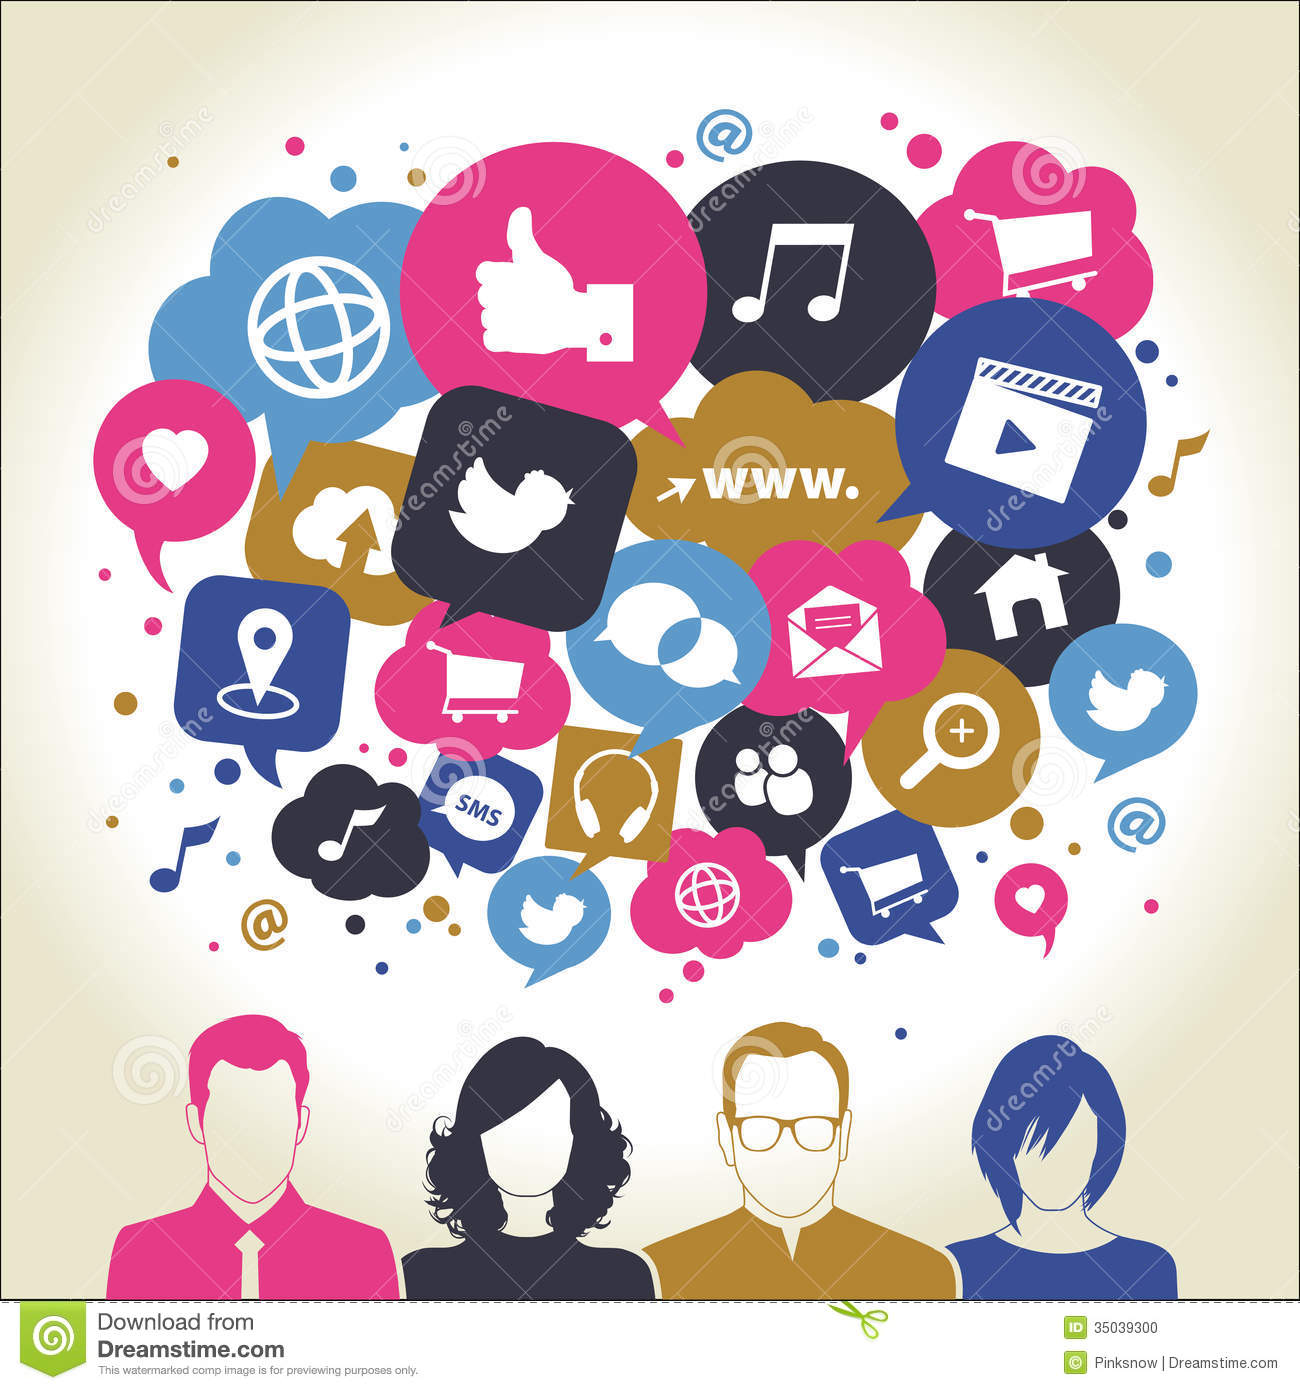 Social Media Icon Group of People